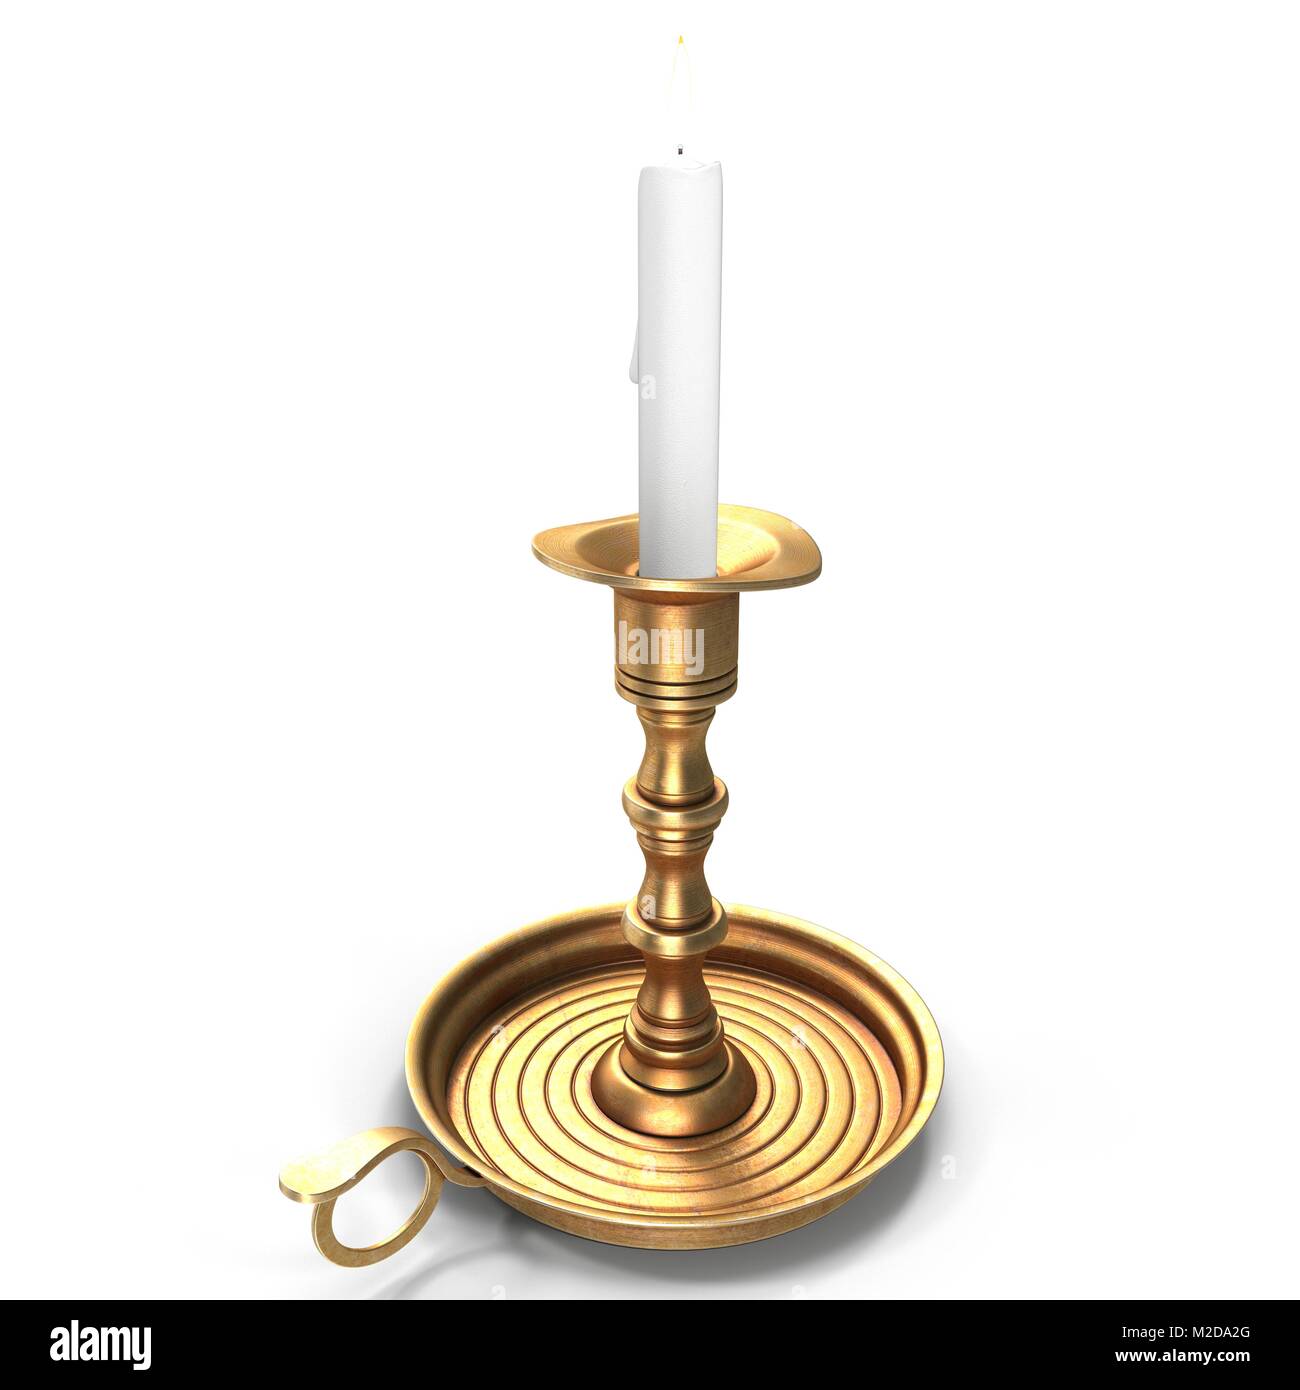 Pillar Candle High Resolution Stock Photography and Images - Alamy